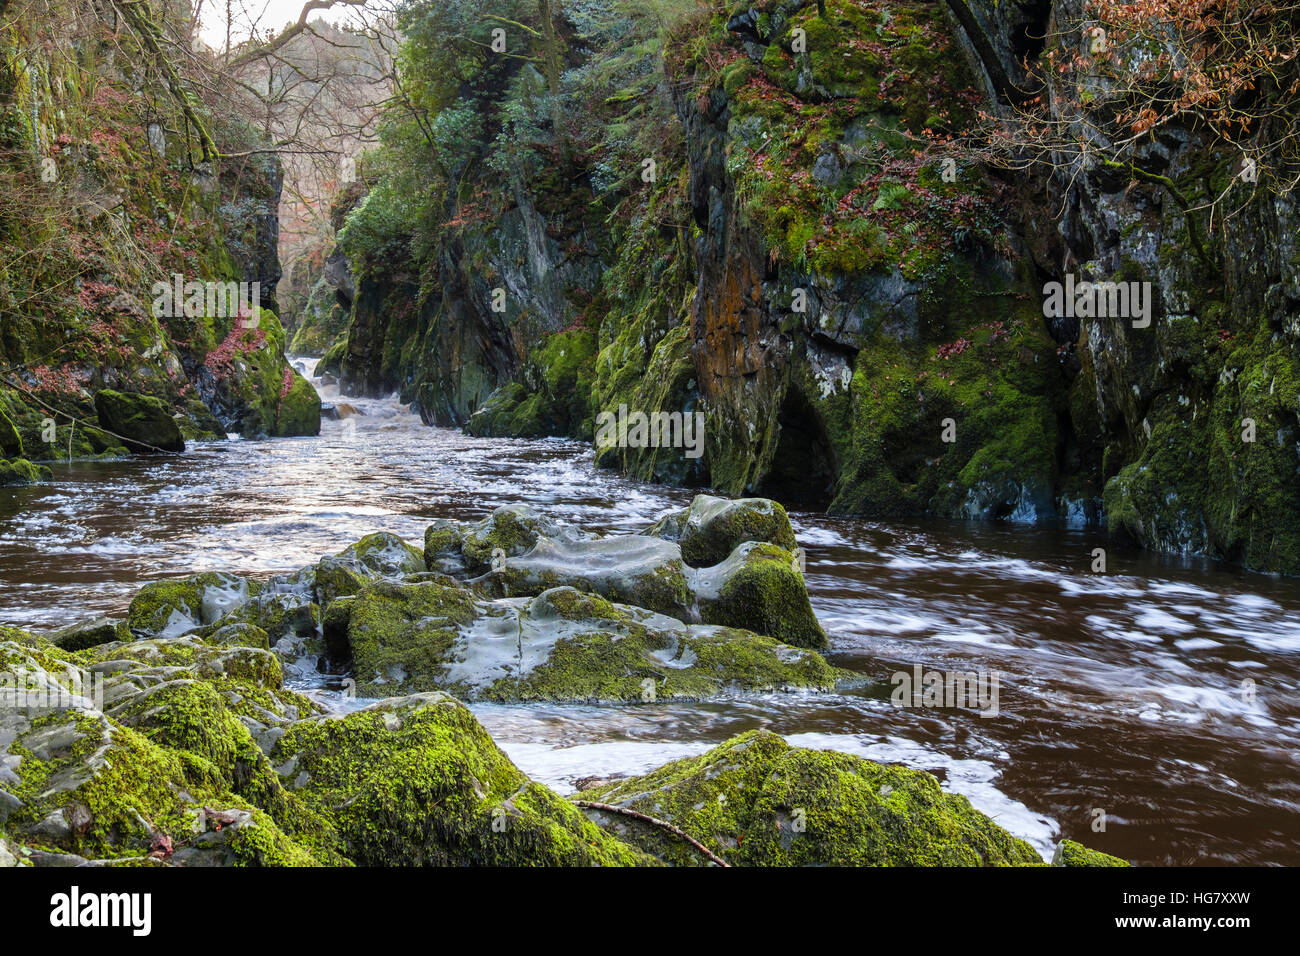 Looking upstream along Afon Conwy River flowing through the narrow Fairy Glen gorge in Snowdonia National Park Betys-y-Coed Wales UK Stock Photo